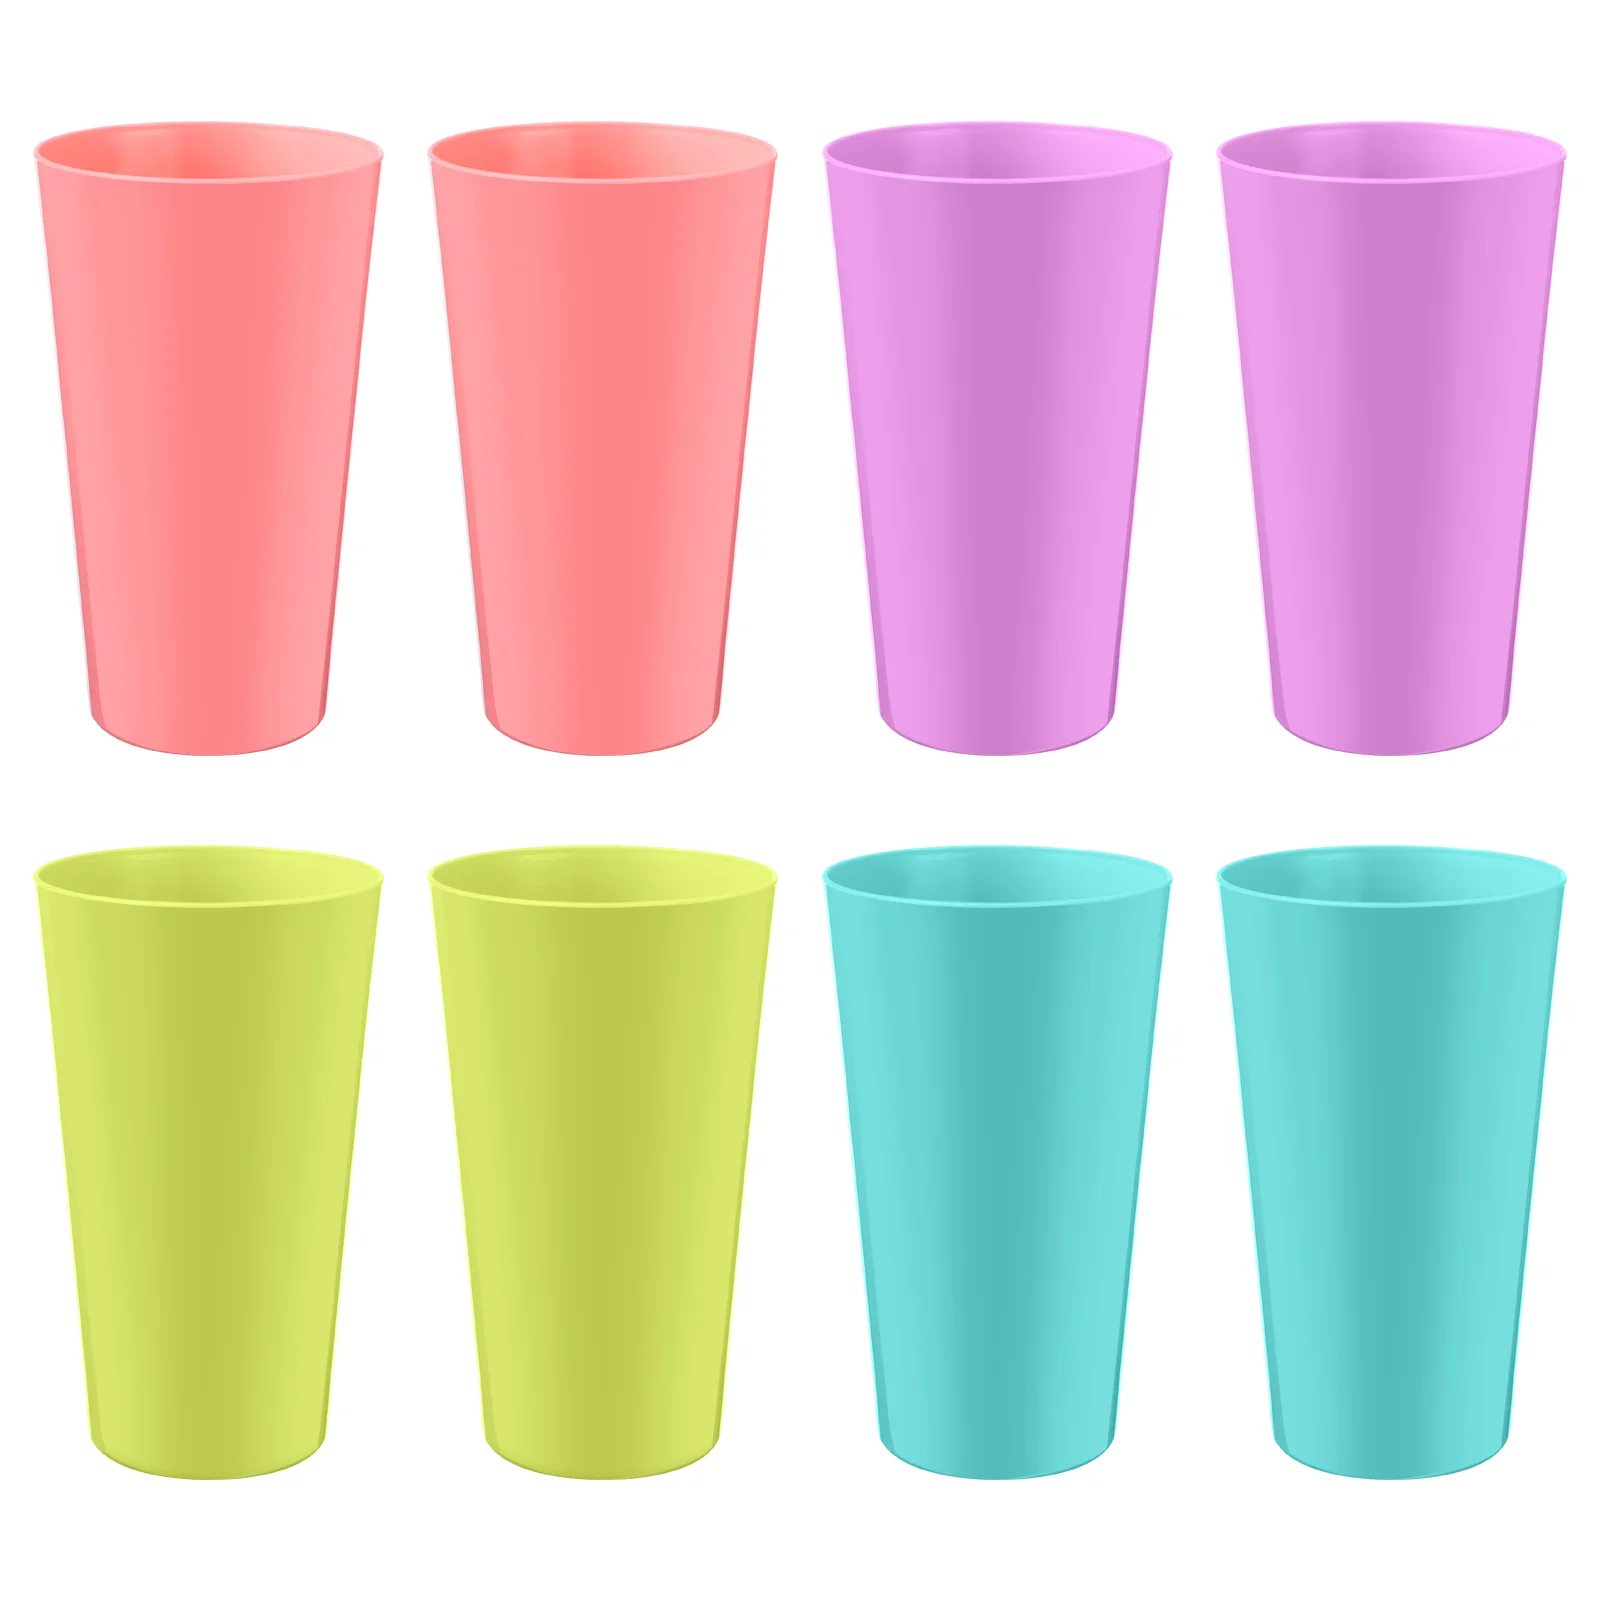 

WINOMO Water Drinking Tumblers Reusable Water Cups Plastic Cups Beverage Tumblers Household Cups (Mixed Color)